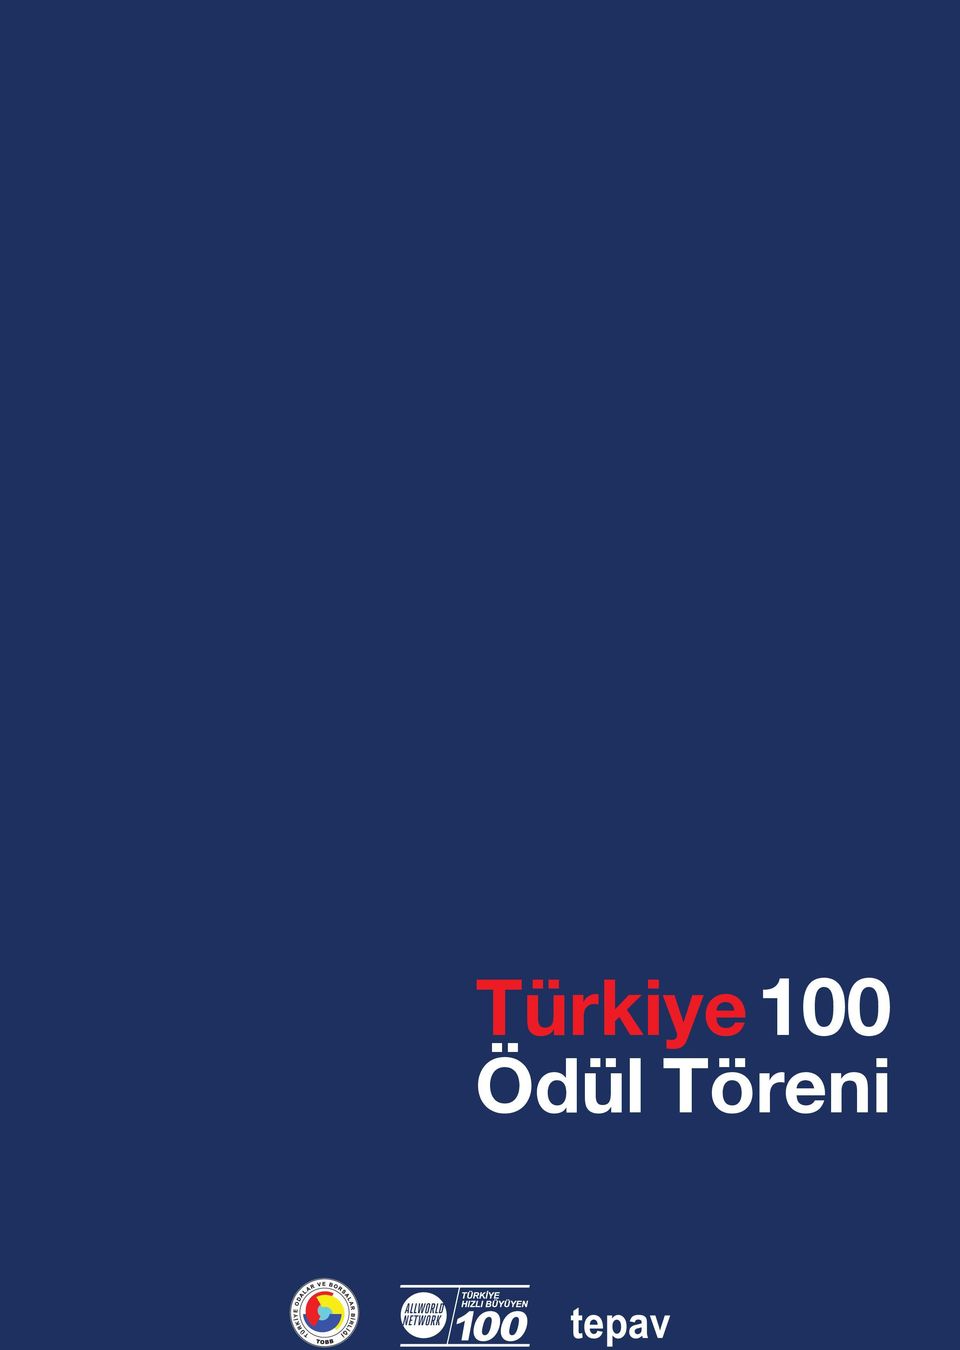 The AllWorld Turkey100 are some of the world s fastest growing young companies that are pioneering solutions in old and new industries and have created 11,000 jobs in three years.